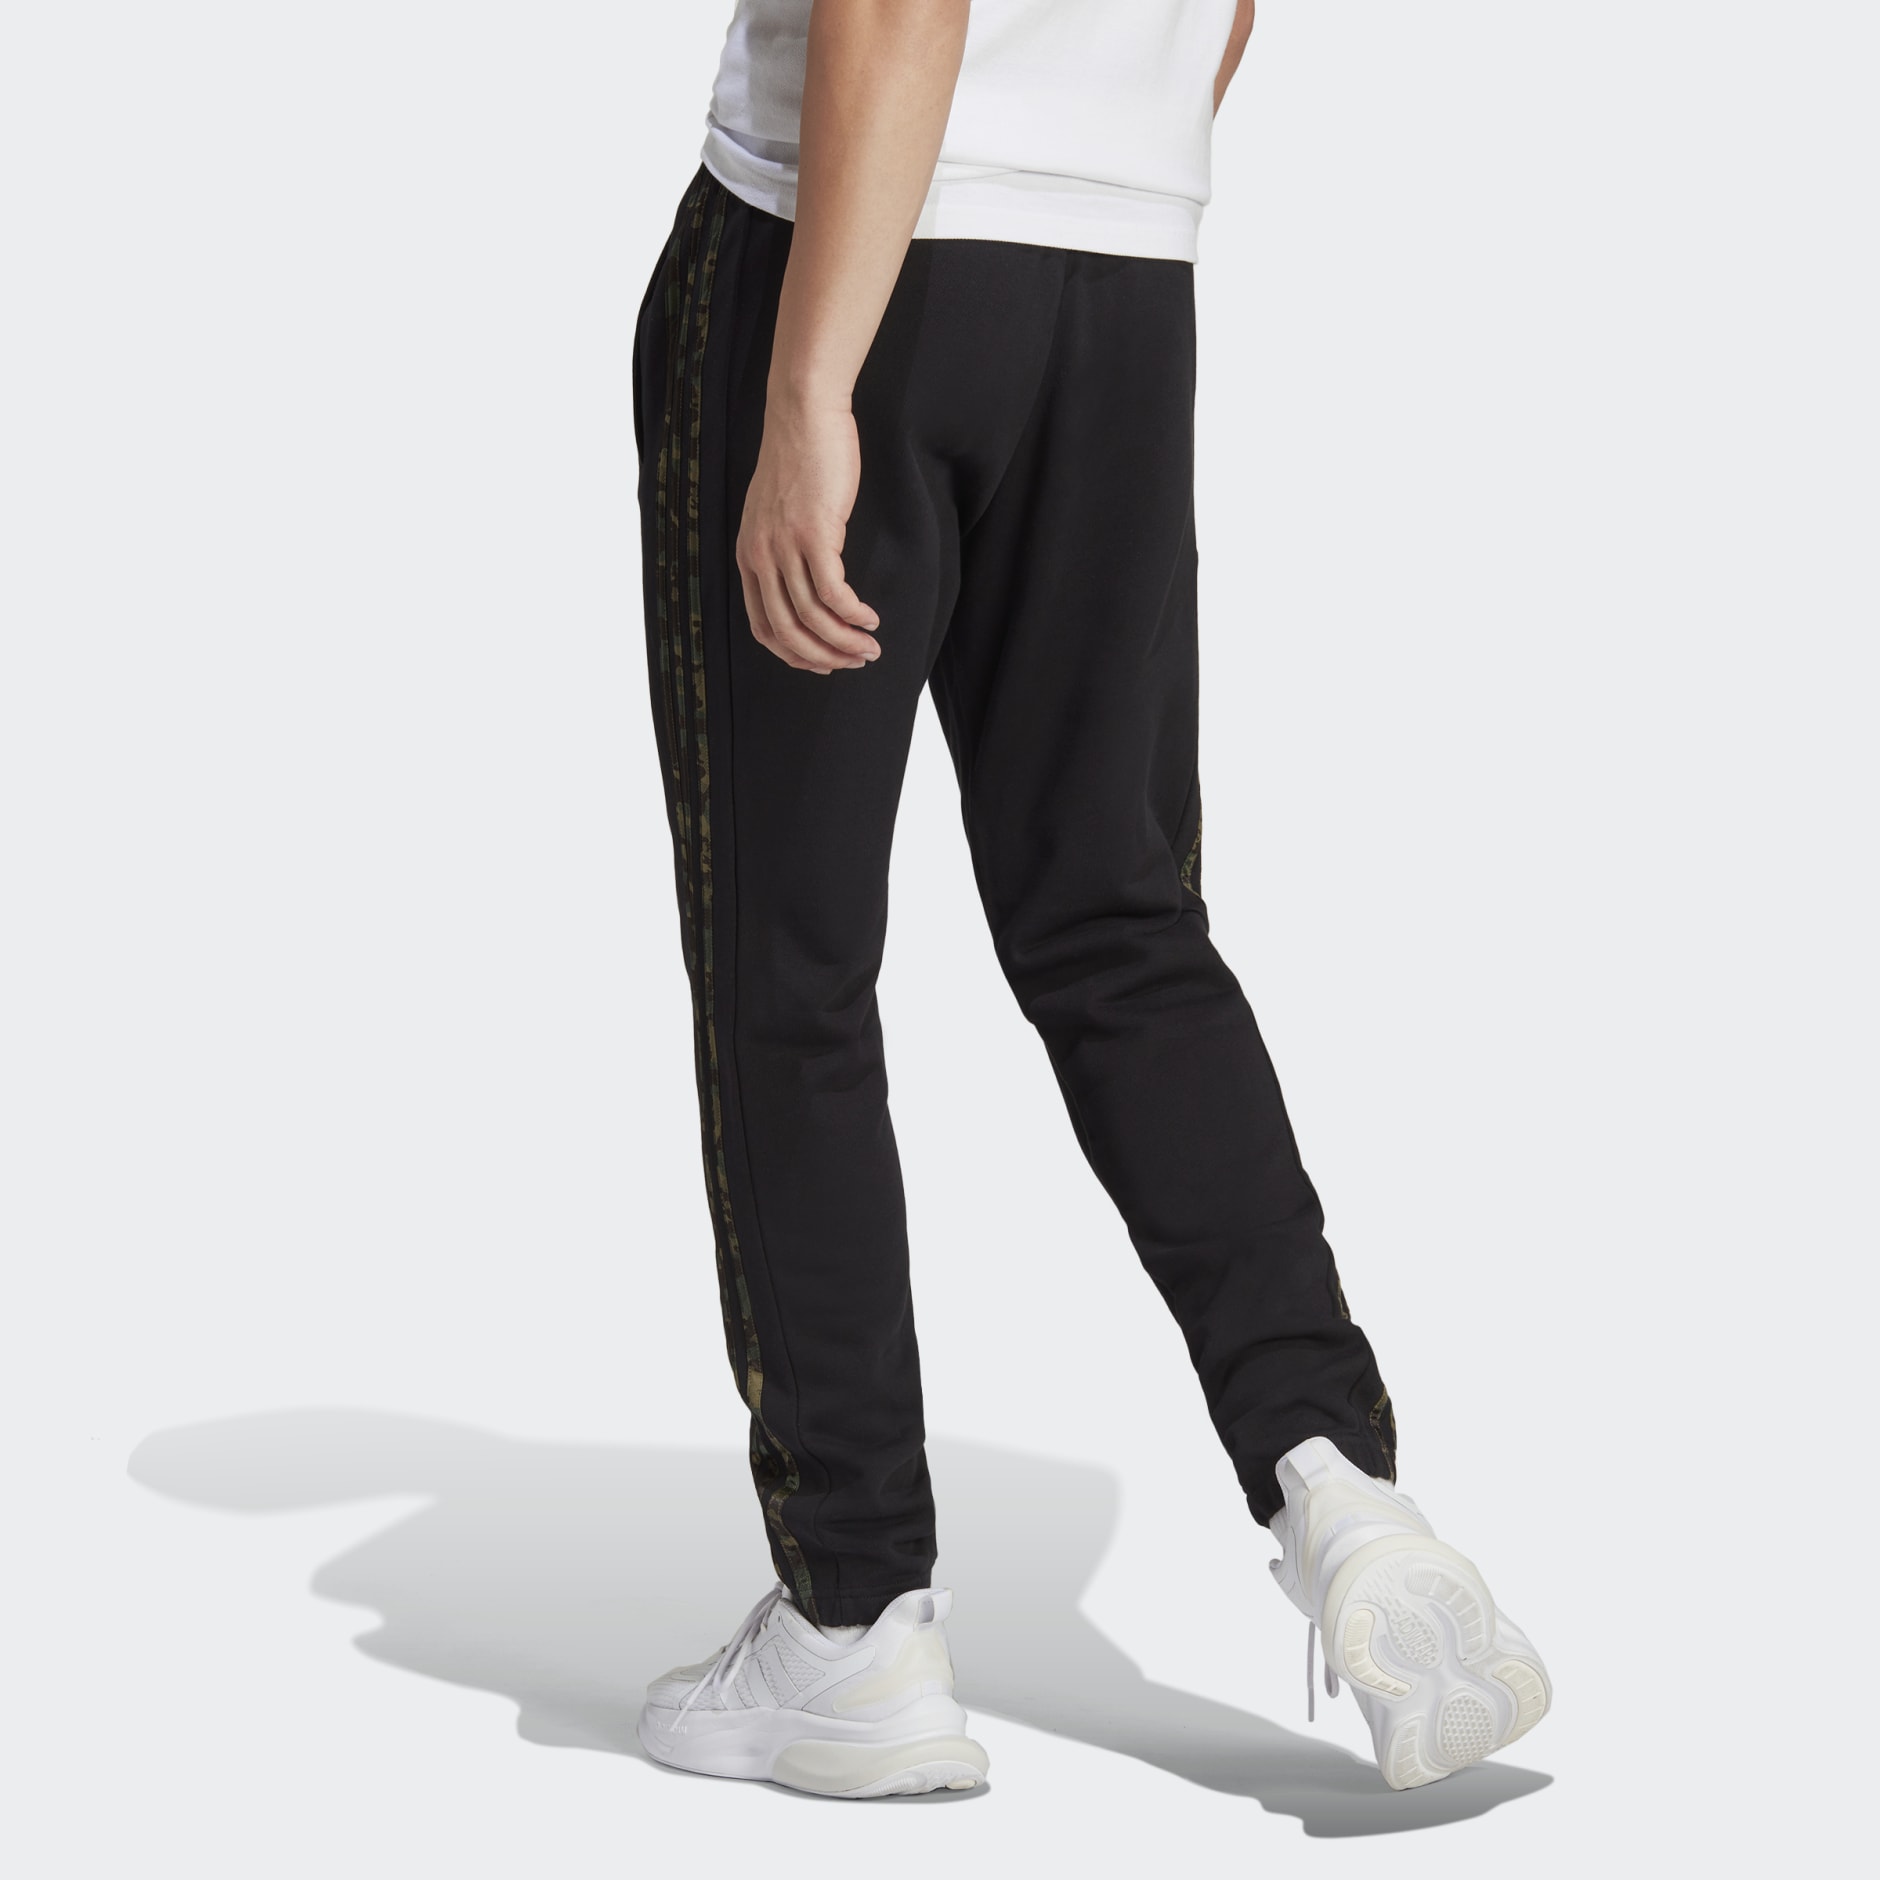 adidas Essentials French Terry Tapered Black Pants adidas Elastic 3-Stripes GH - Cuff 